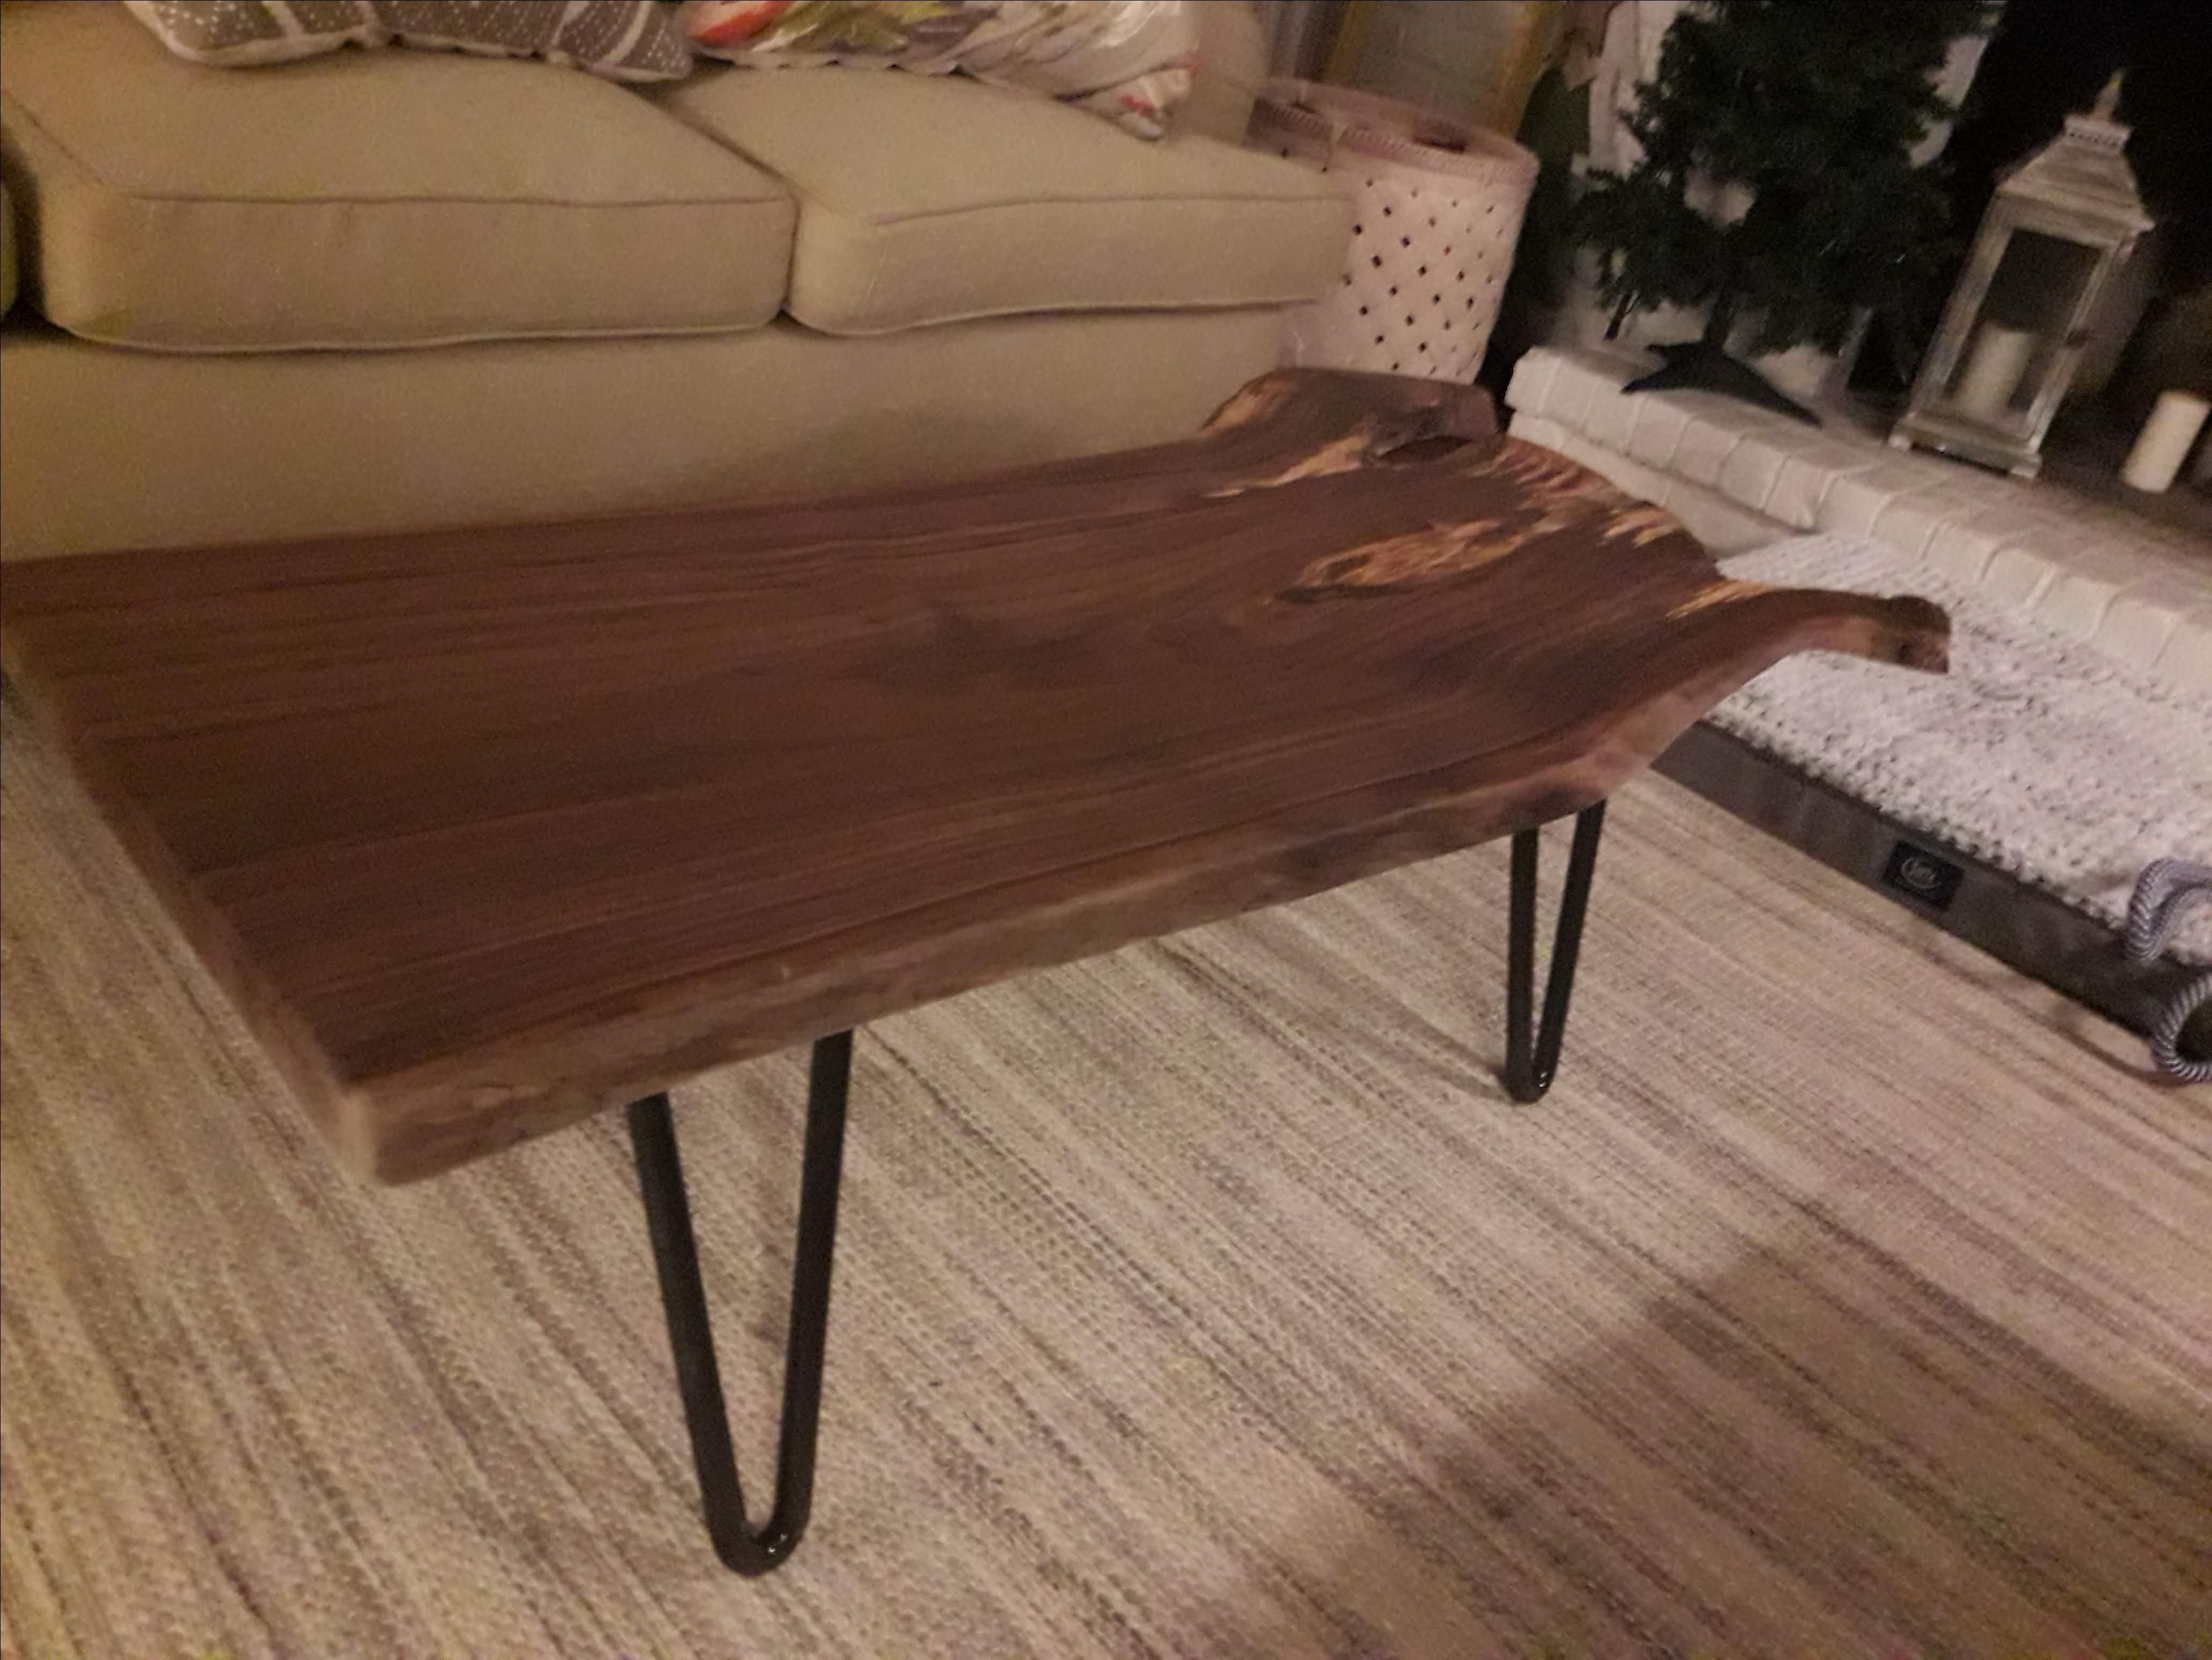 https://images.custommade.com/nlvQAgU6oOYPrlZbAiv2lC_tFEw=/custommade-photosets/8ccdf73034d2b8e_spalted_walnut_coffee_table_with_hairpin_legs2.jpg